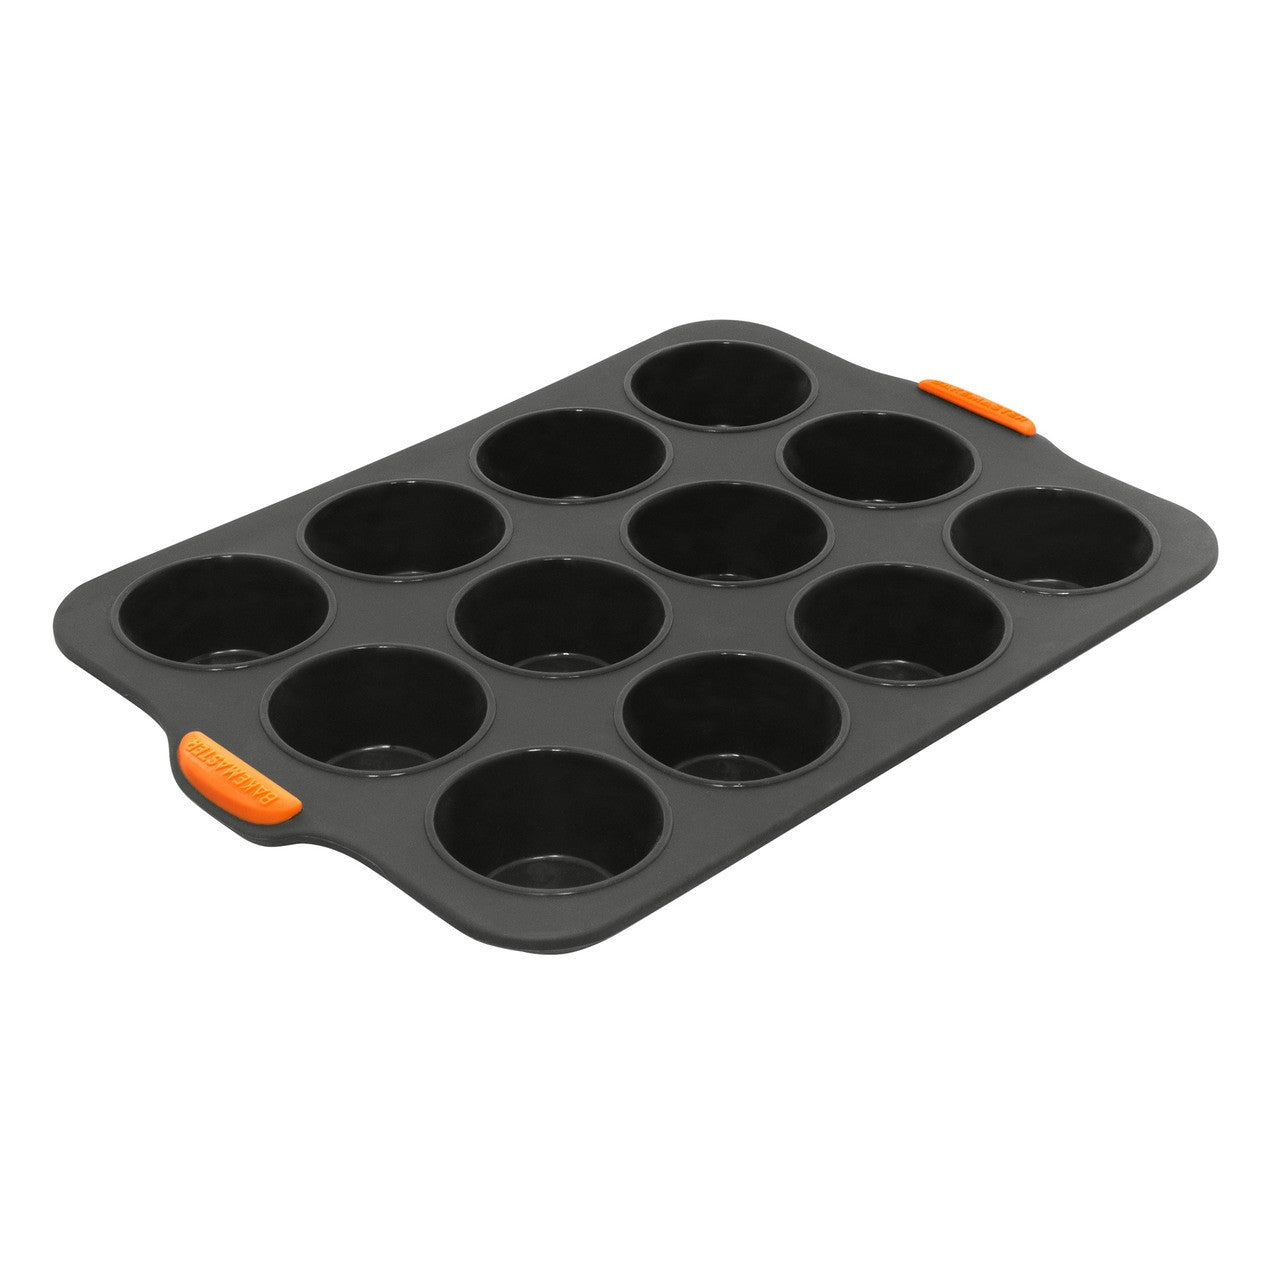 Bakemaster Silicone 12 Cup Muffin Tray 35.5x24.5cm